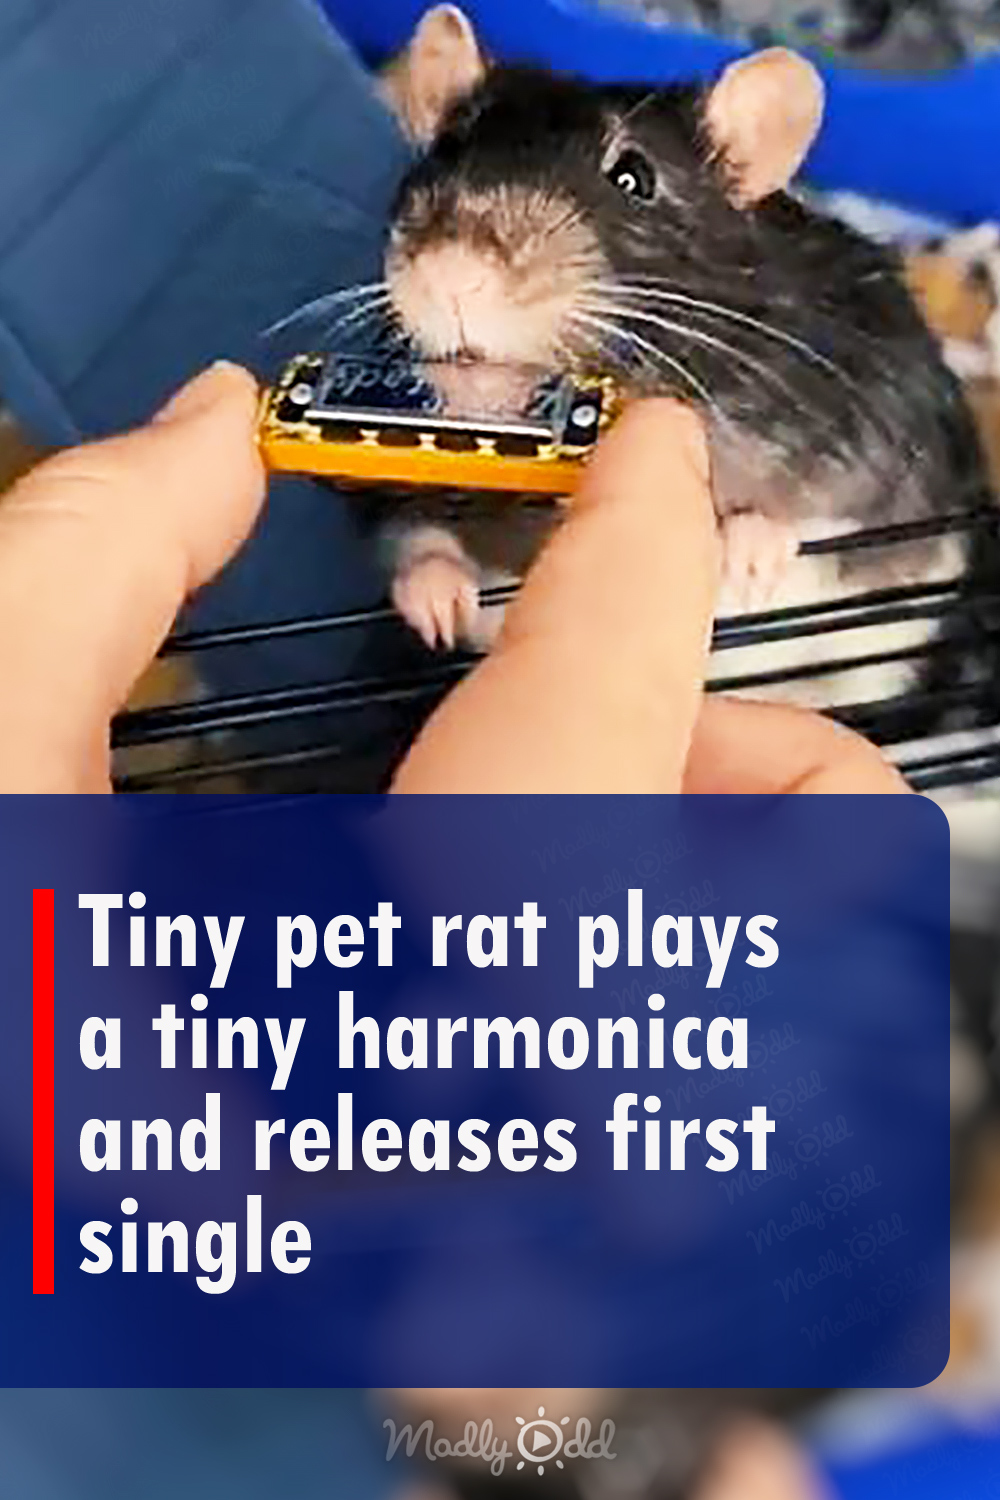 Tiny pet rat plays a tiny harmonica and releases first single